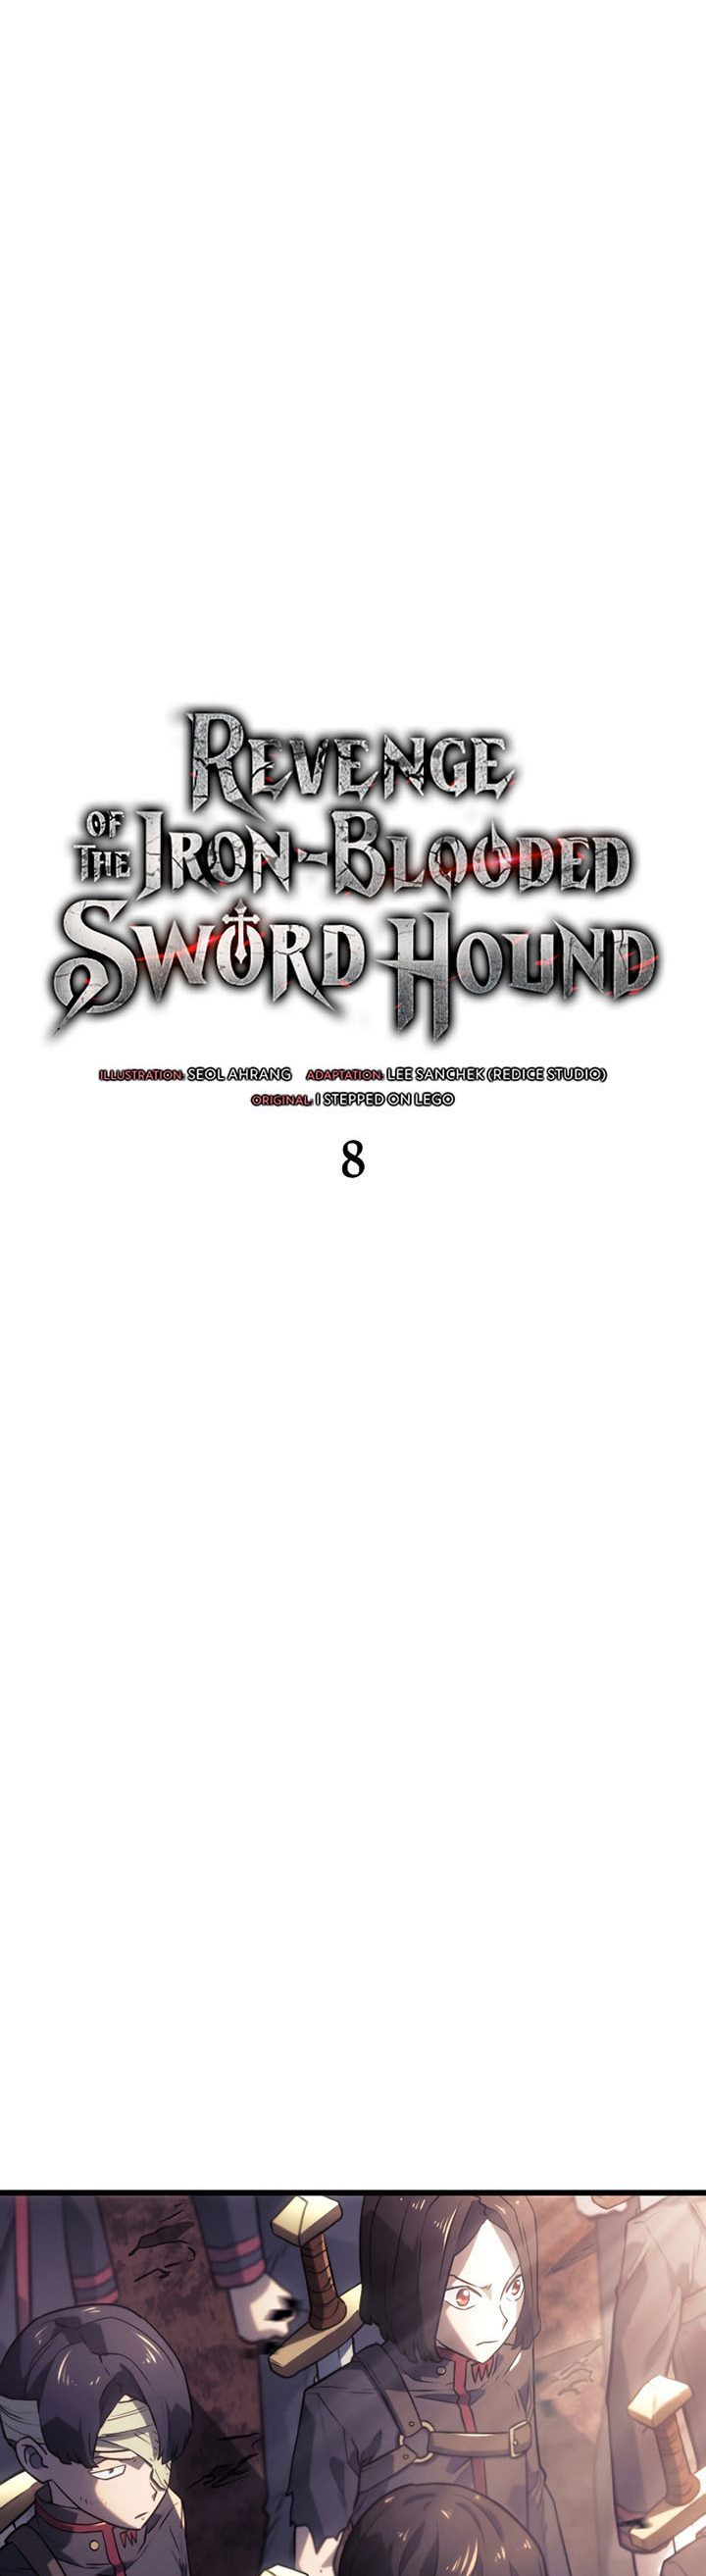 Revenge Of The Iron-blooded Sword Hound Chapter 8